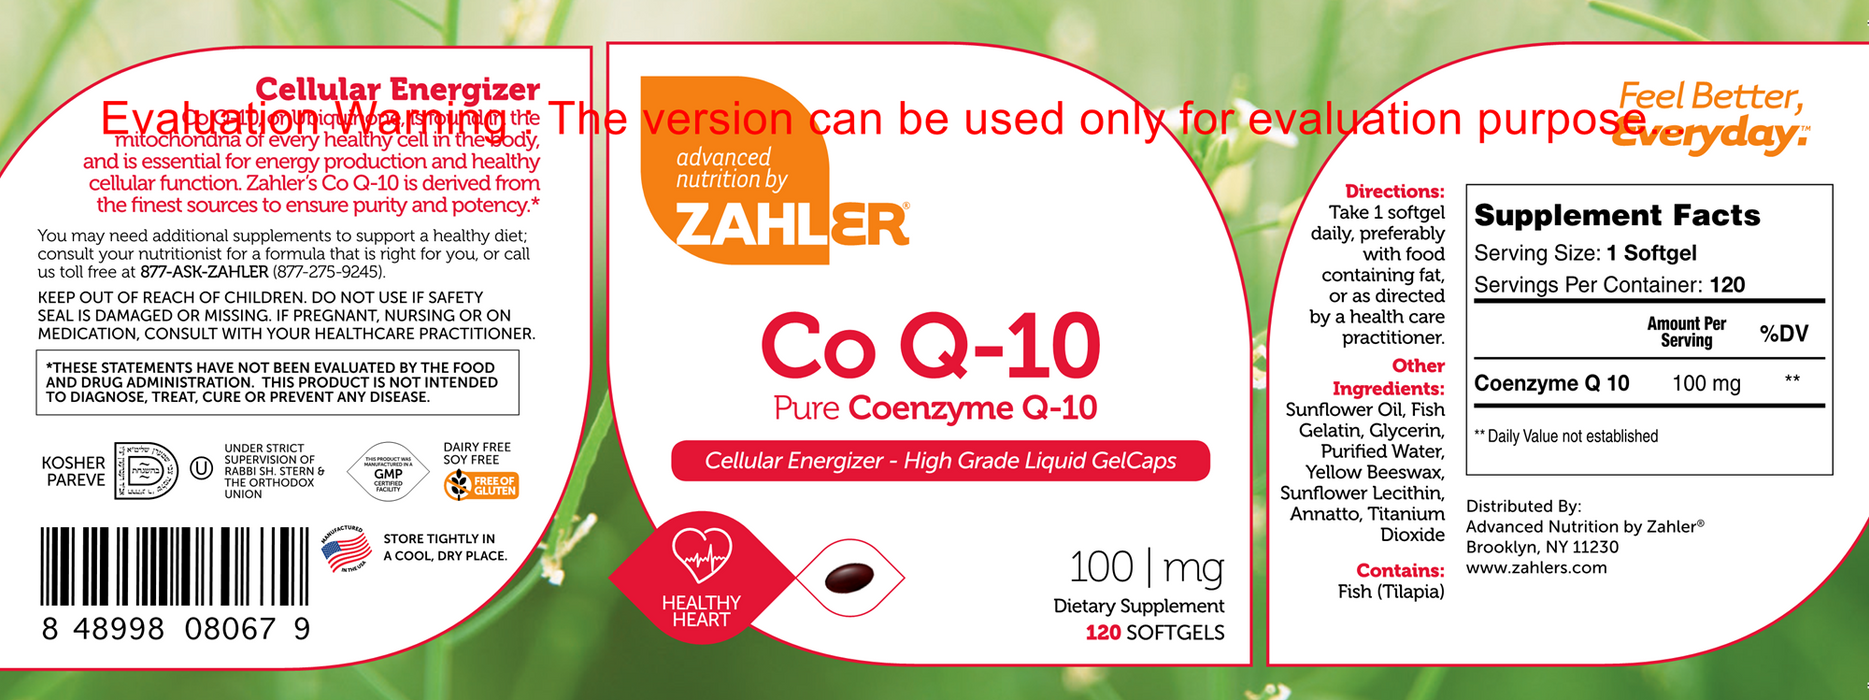 Advanced Nutrition by Zahler Co Q-10 120 softgels